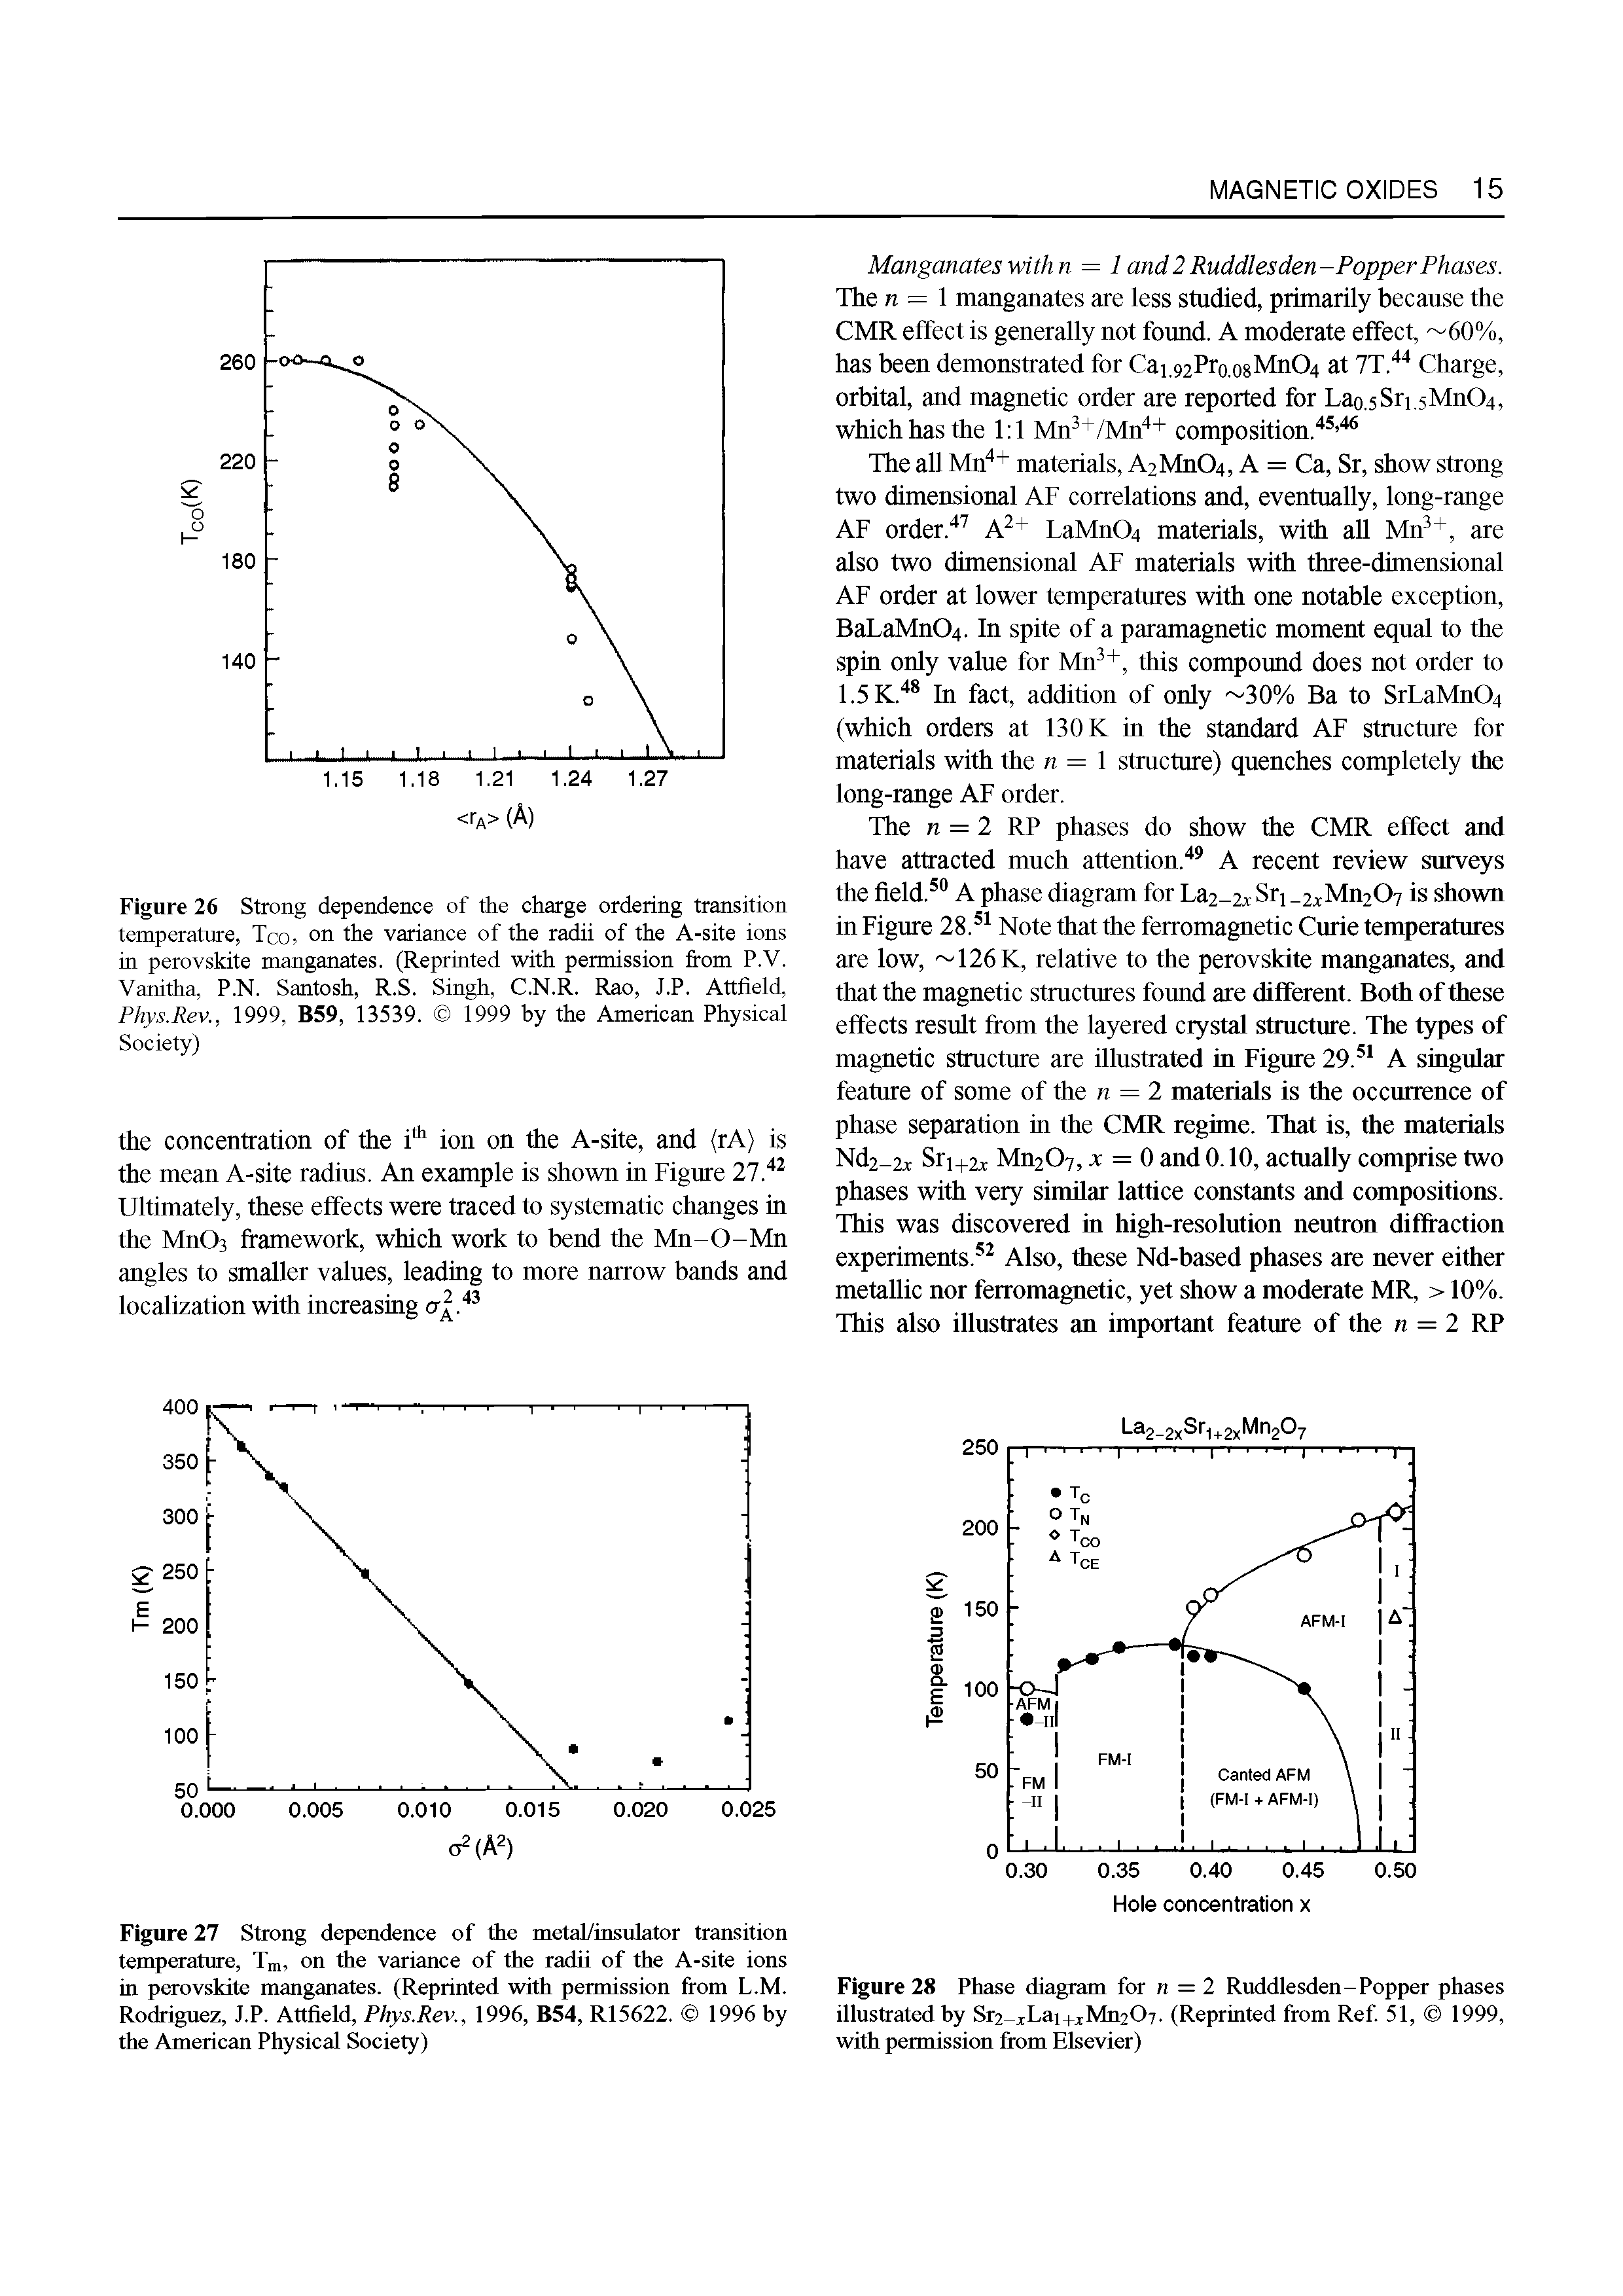 Figure 28 Phase diagram for n = 2 Ruddlesden-Popper phases illustrated hy Sr2 j Lai+j Mn207. (Reprinted from Ref 51, 1999, with permission from Elsevier)...